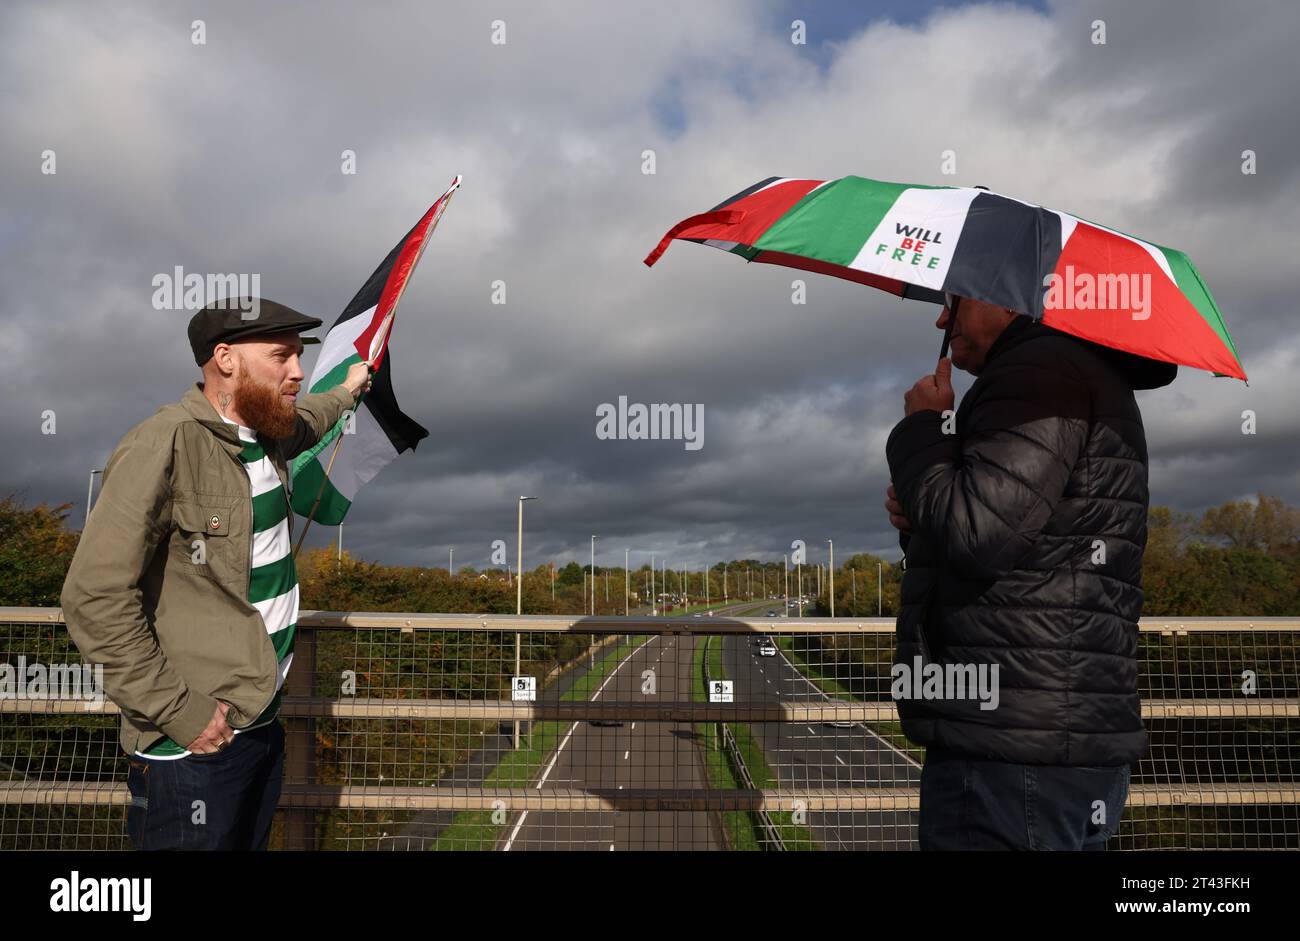 Leicester, Leicestershire, UK. 28th October 2023. A protester wearing a Celtic Football club shirt waves a flag during a pro-Palestinian demonstration and banner drop near to the base of UAV Tactical Systems. UAV Tactical Systems is an Israeli-French company manufacturing drones sold to the British army, Israel and international arms markets. Credit Darren Staples/Alamy Live News. Stock Photo